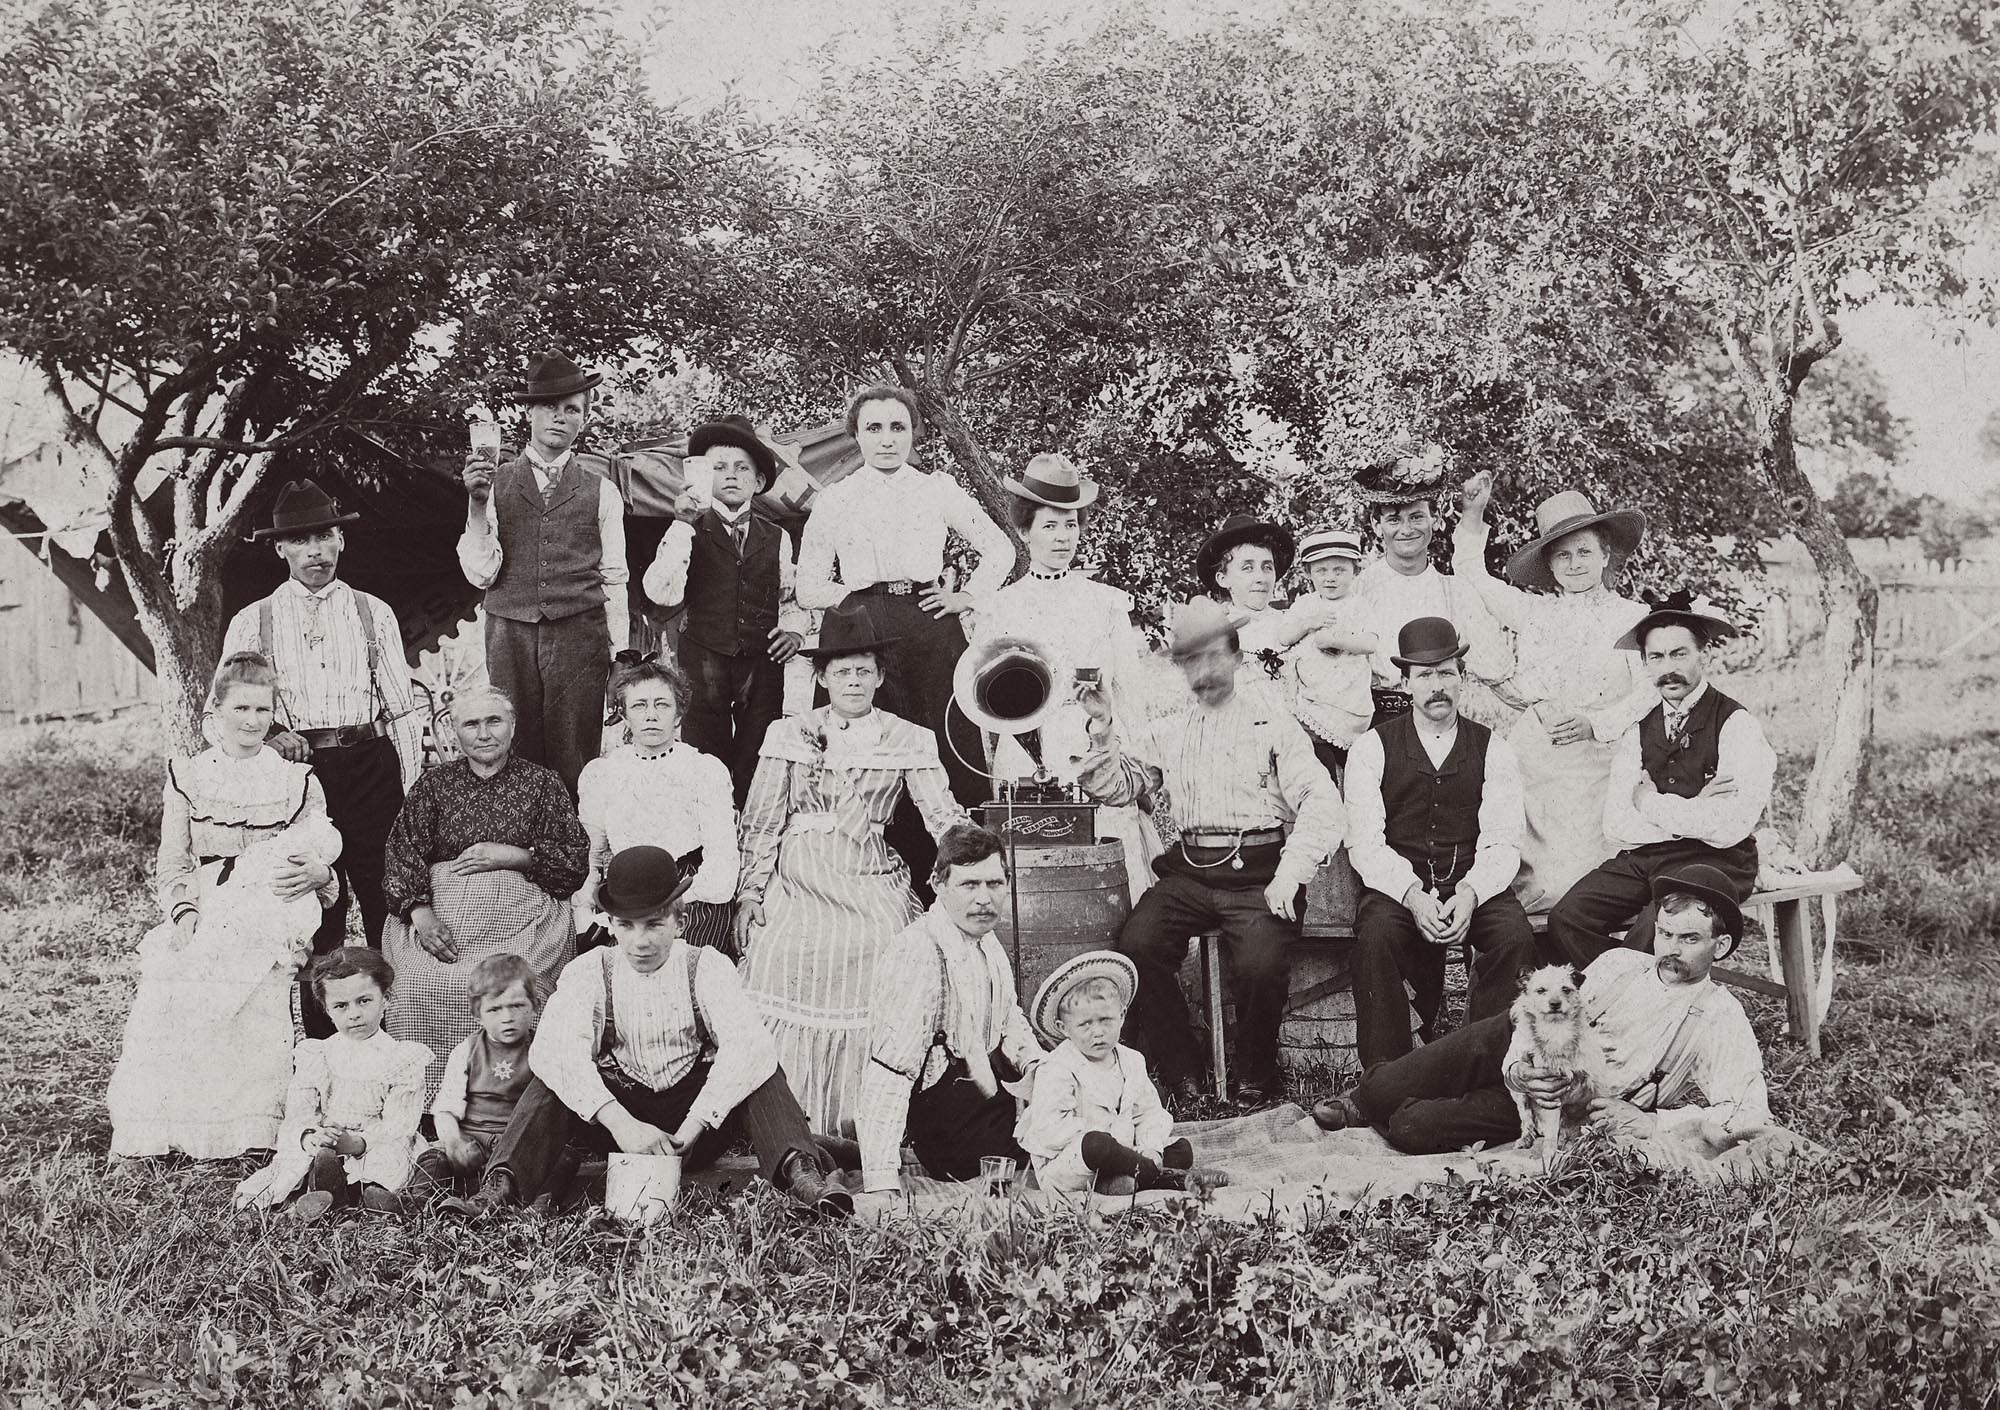 A large group (extended family?) enjoys music outdoors on an Edison Standard Phonograph, circa 1902. The photographer's stamp on the rear of the mount indicates it was taken in the Milwaukee area.